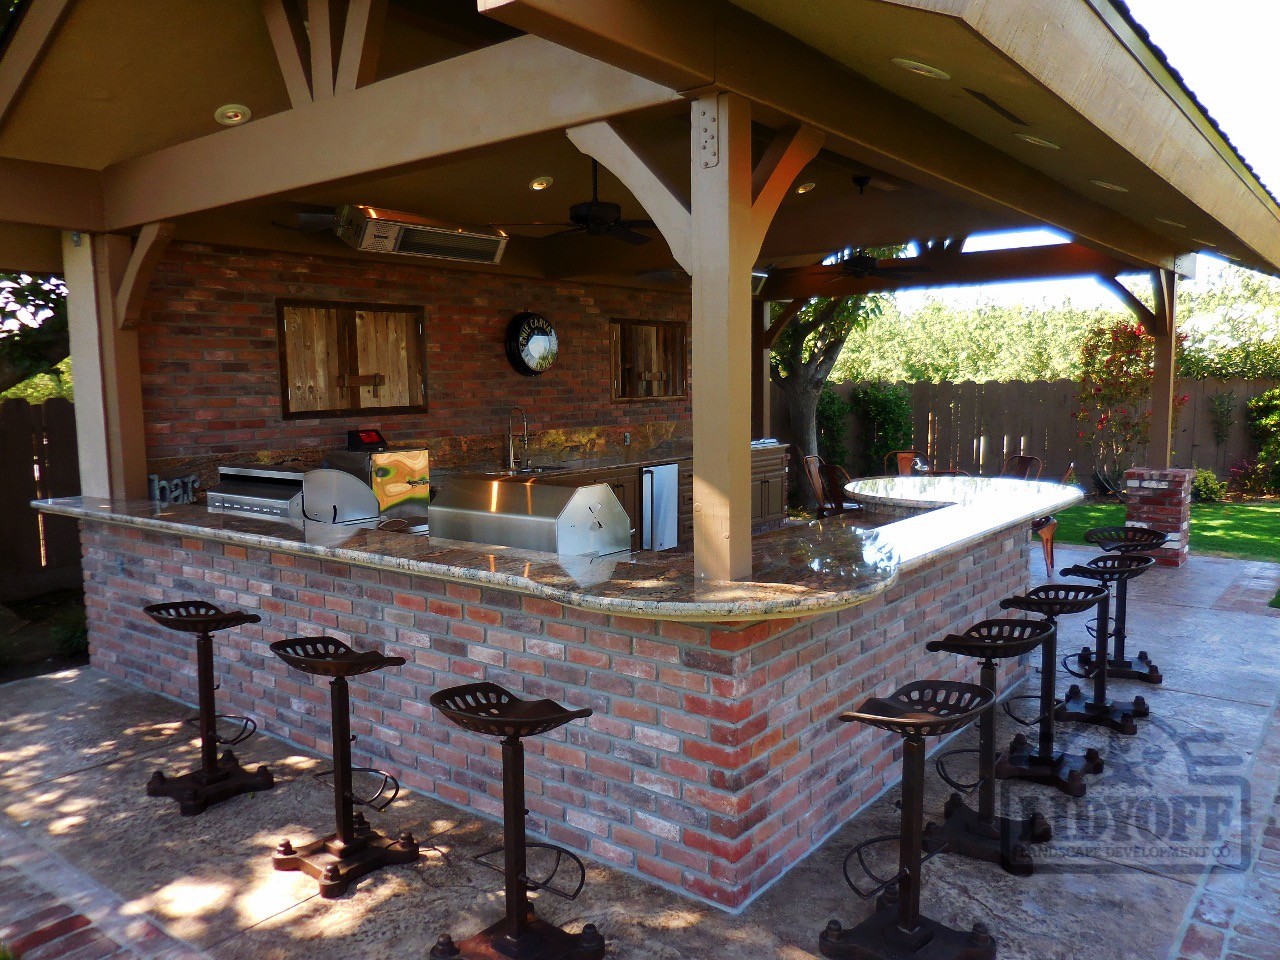 Outdoor Kitchens | Lidyoff Landscaping Development Co.